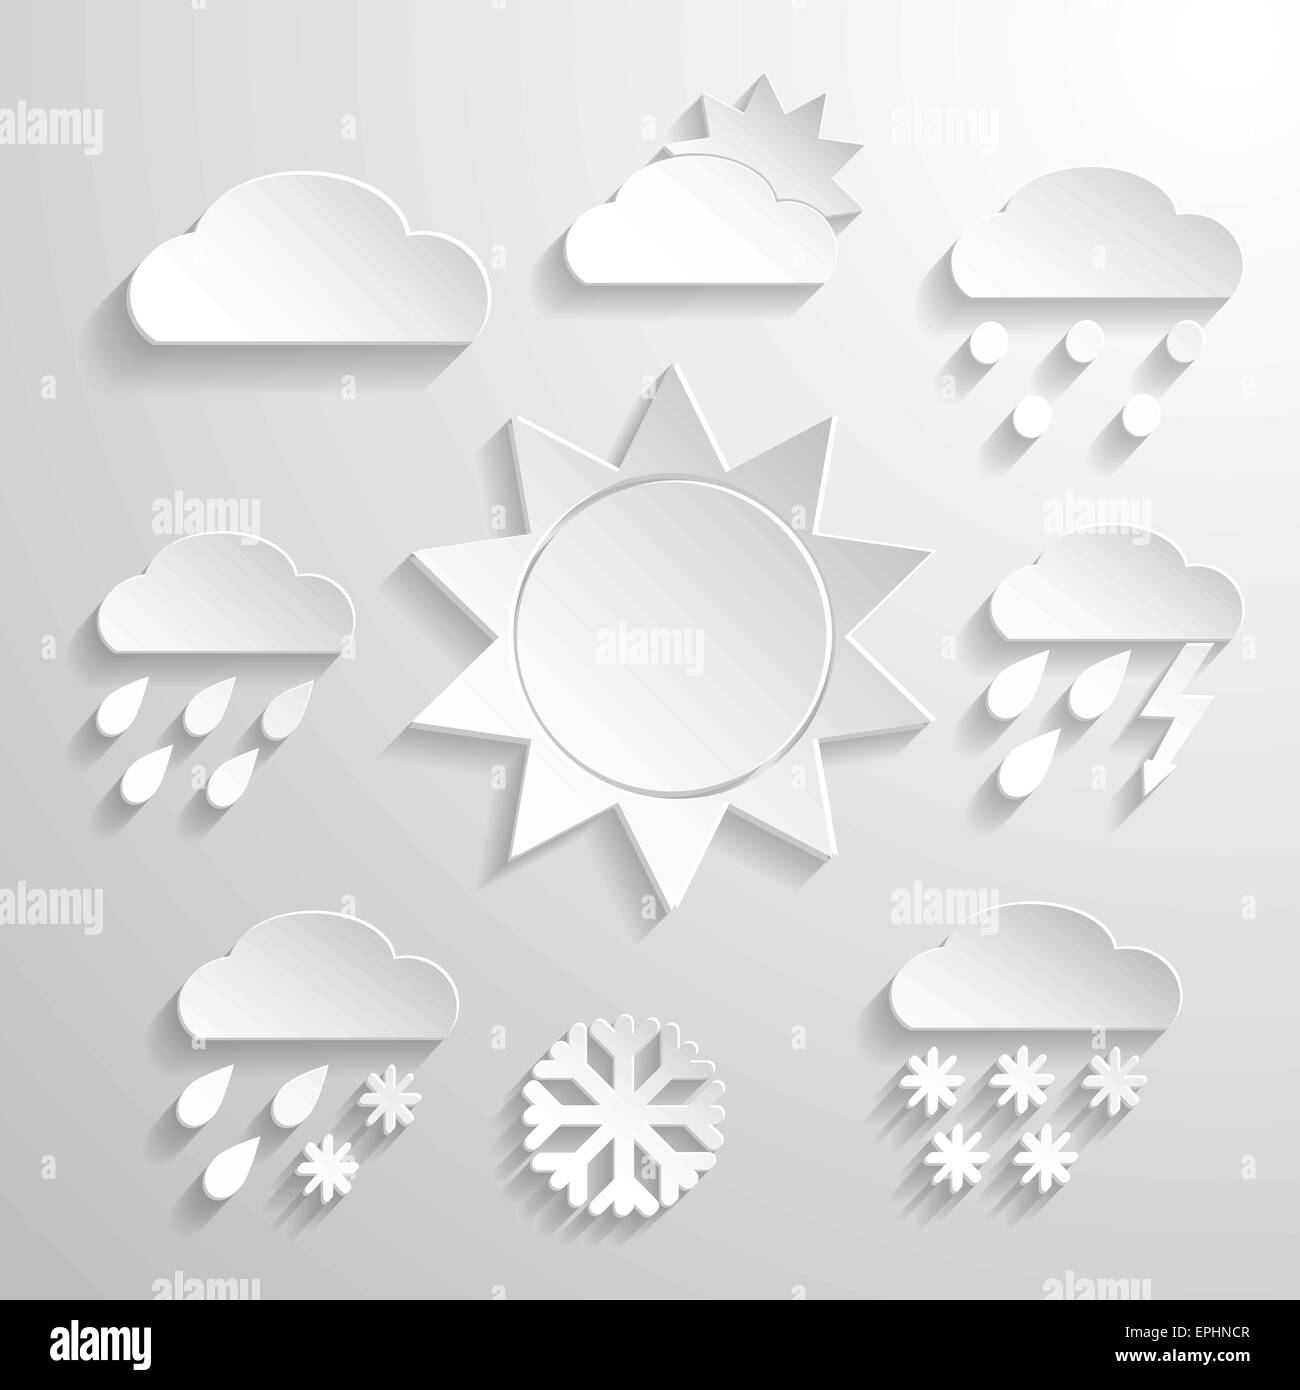 Weather icons in paper style. Vector background or separate elements Stock Vector